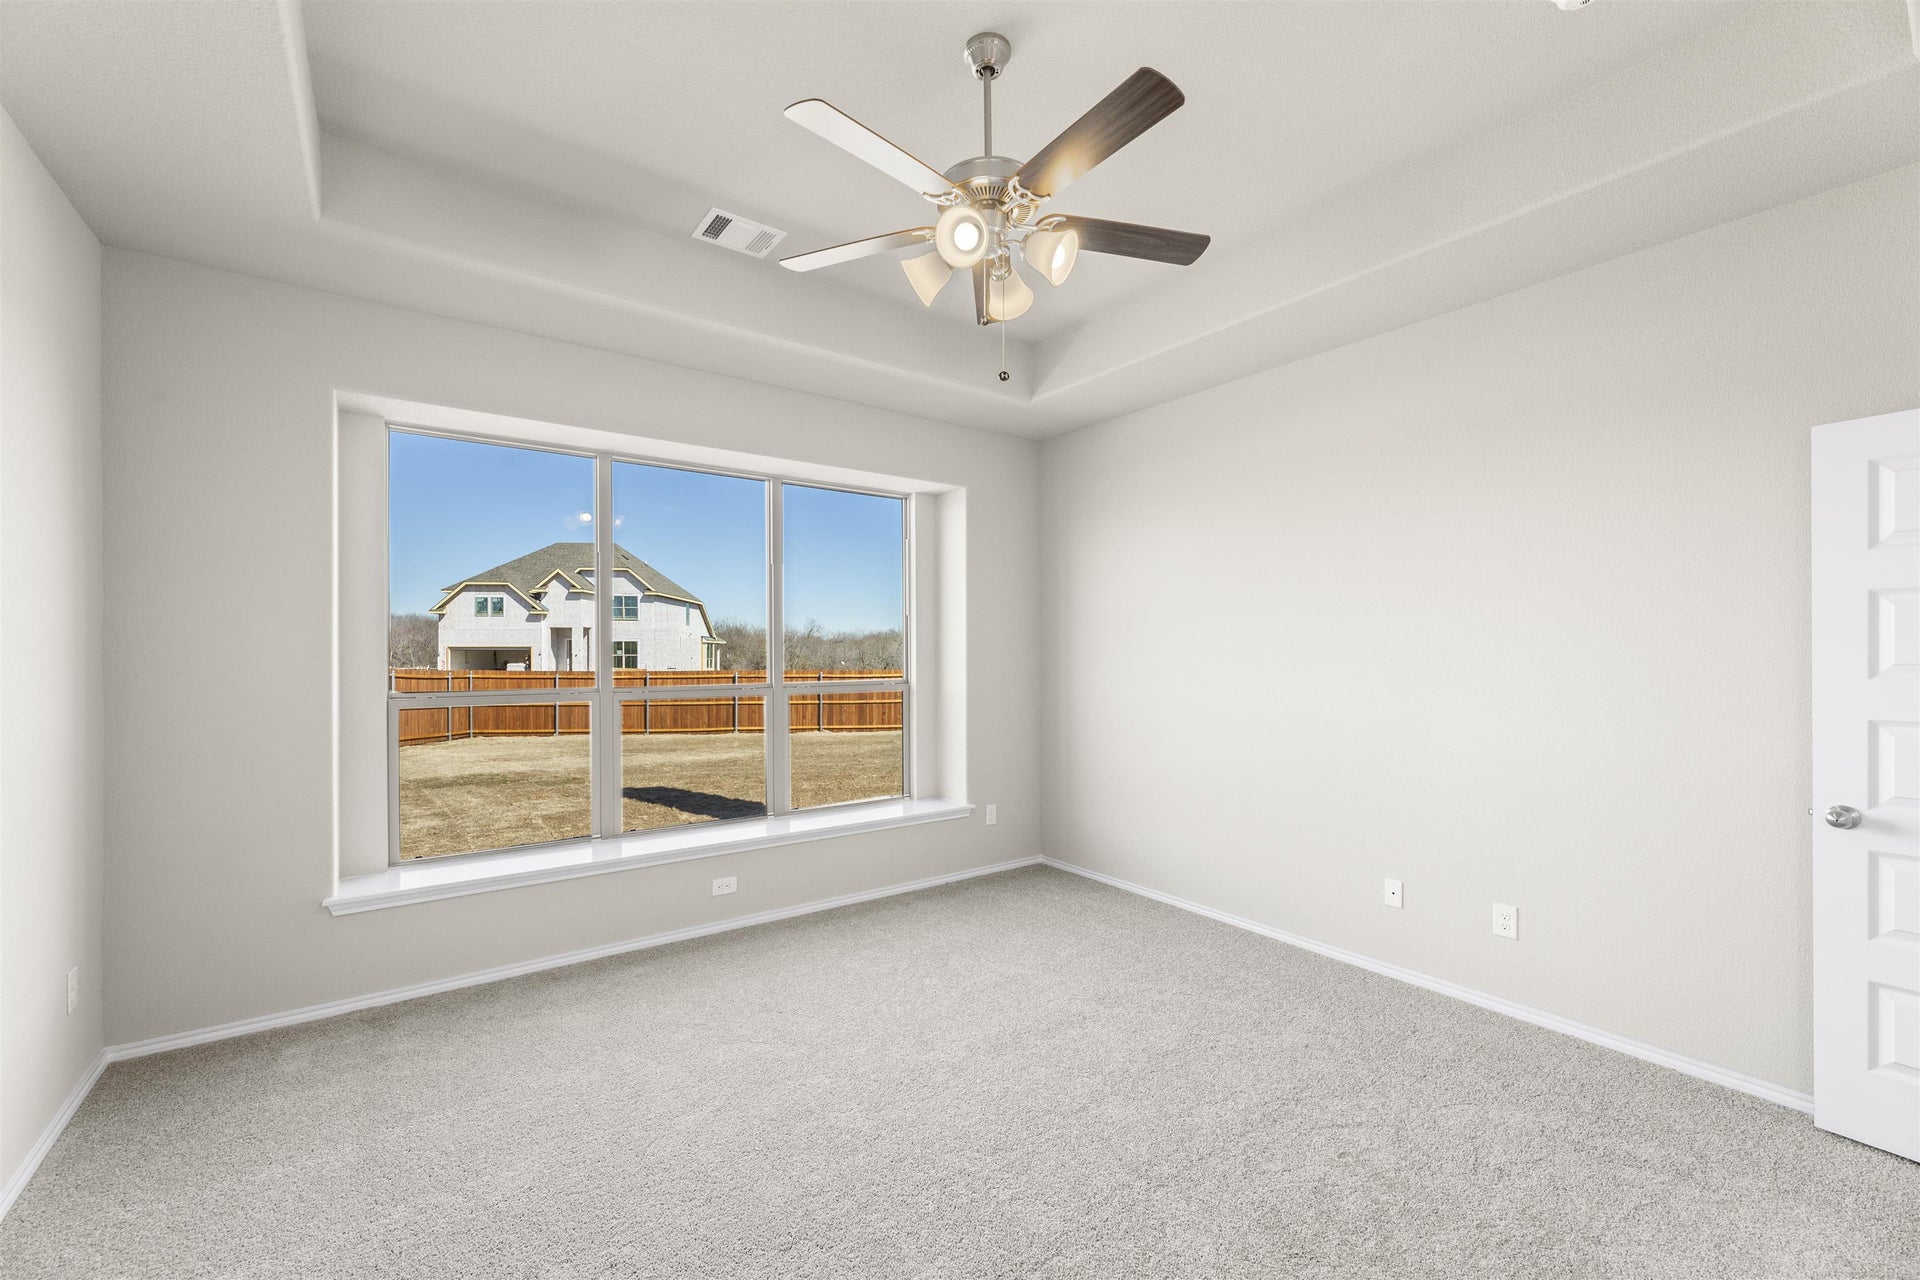 2,460sf New Home in Crowley, TX